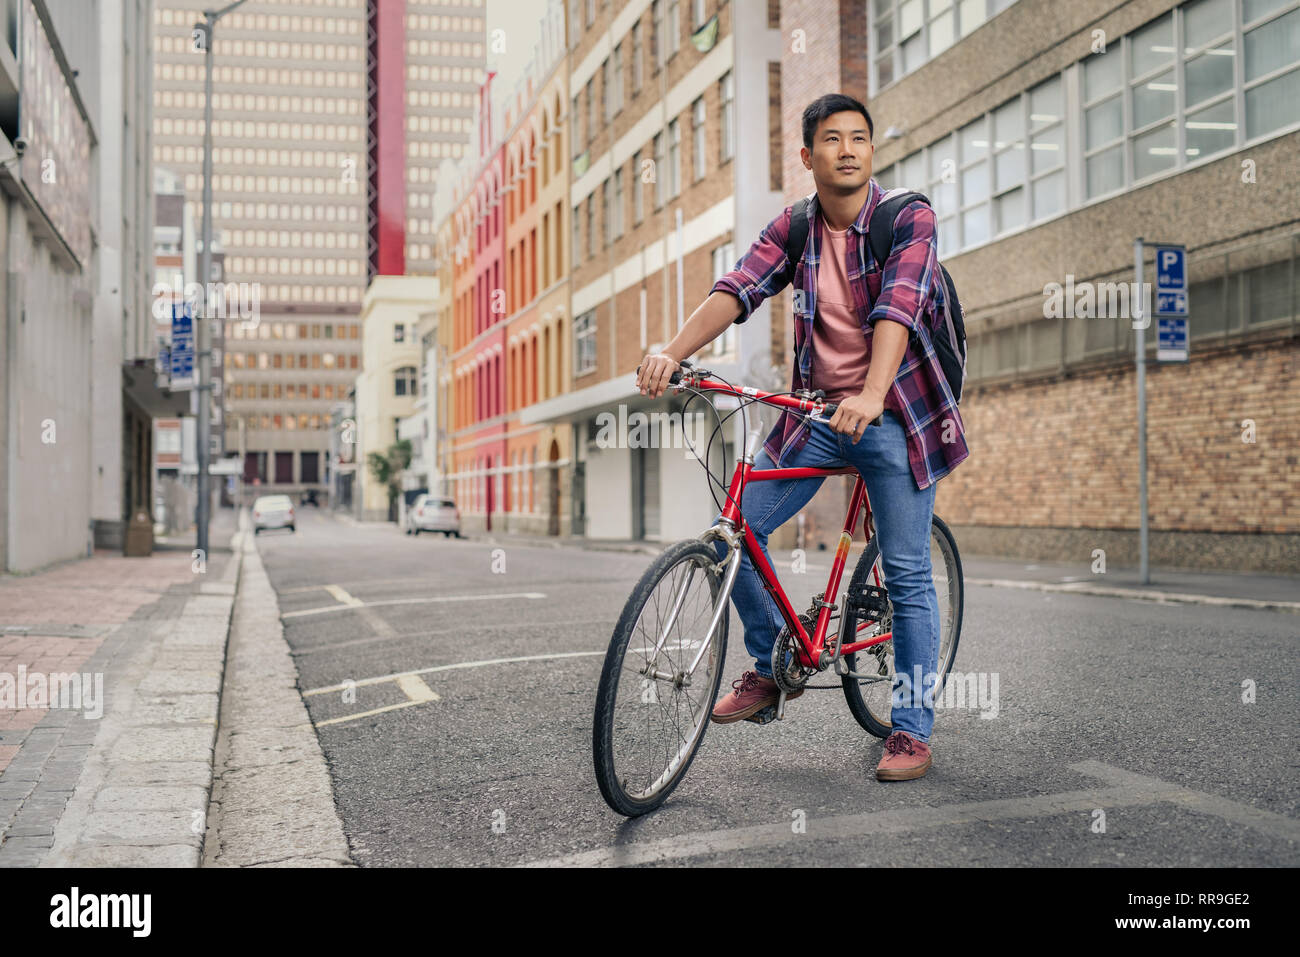 Young man sitting on his bicycle on a city street Stock Photo